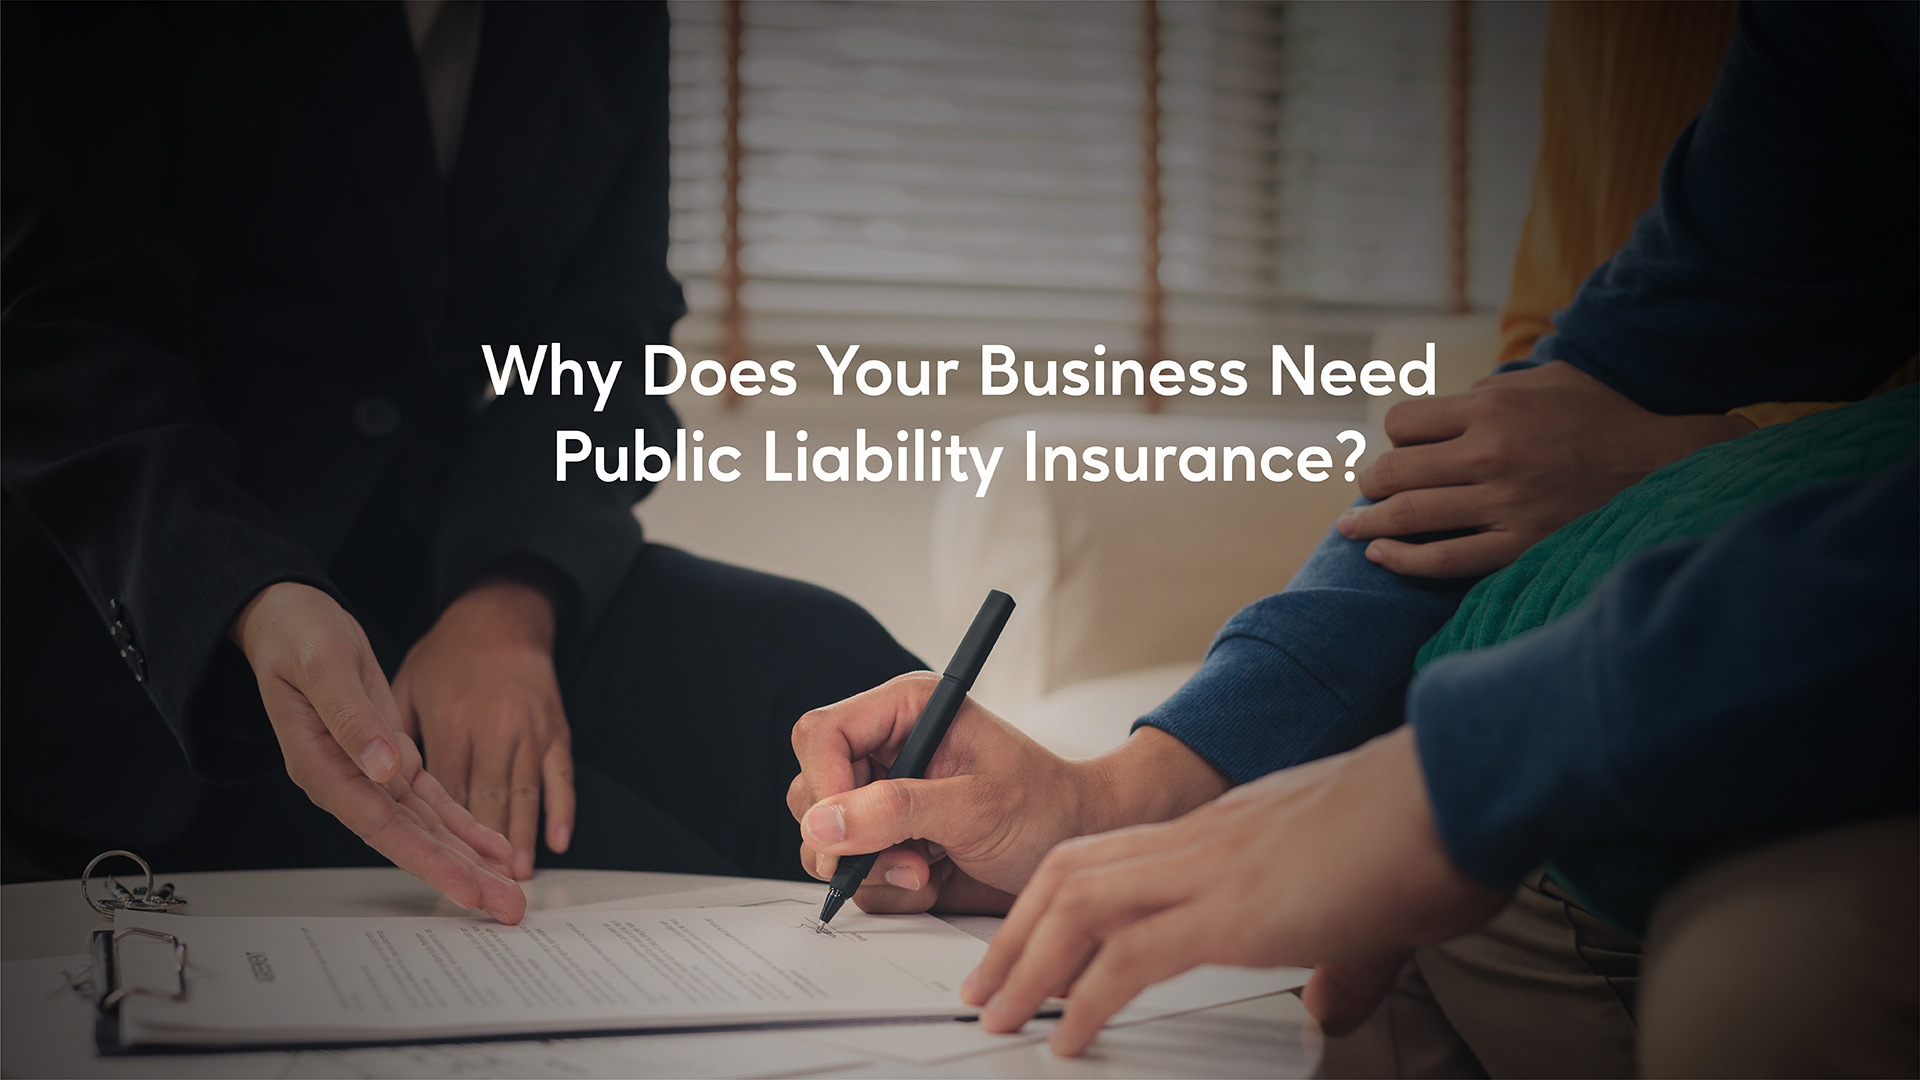 Why Does Your Business Need Public Liability Insurance?